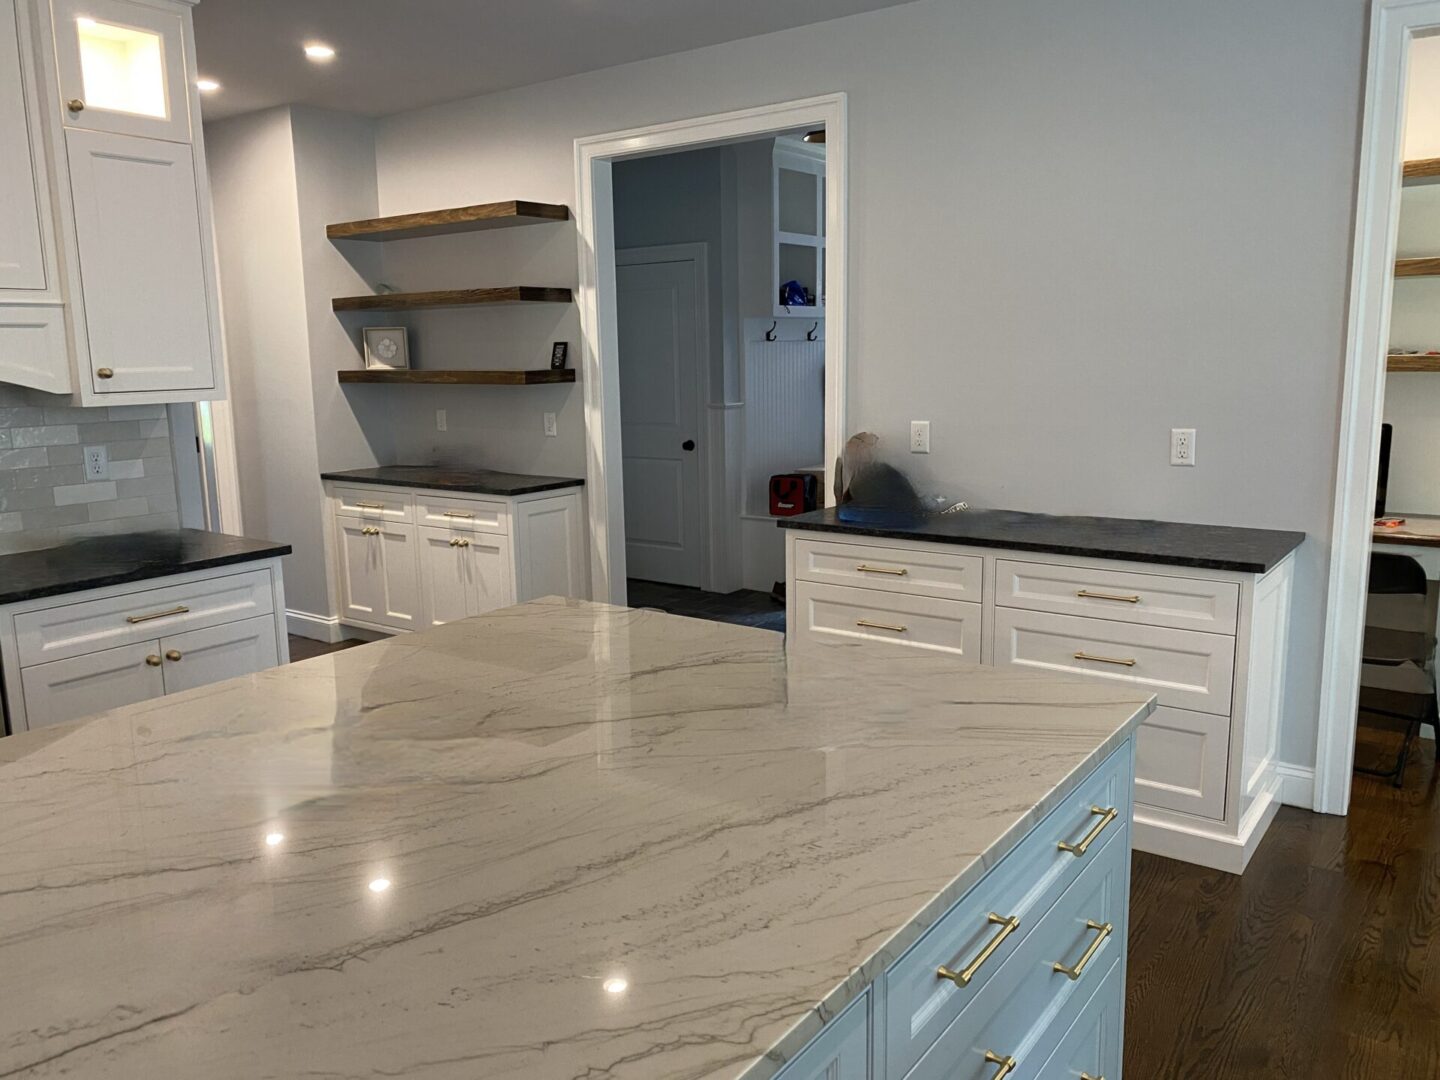 A Kitchen Space of a House With Marble Counters